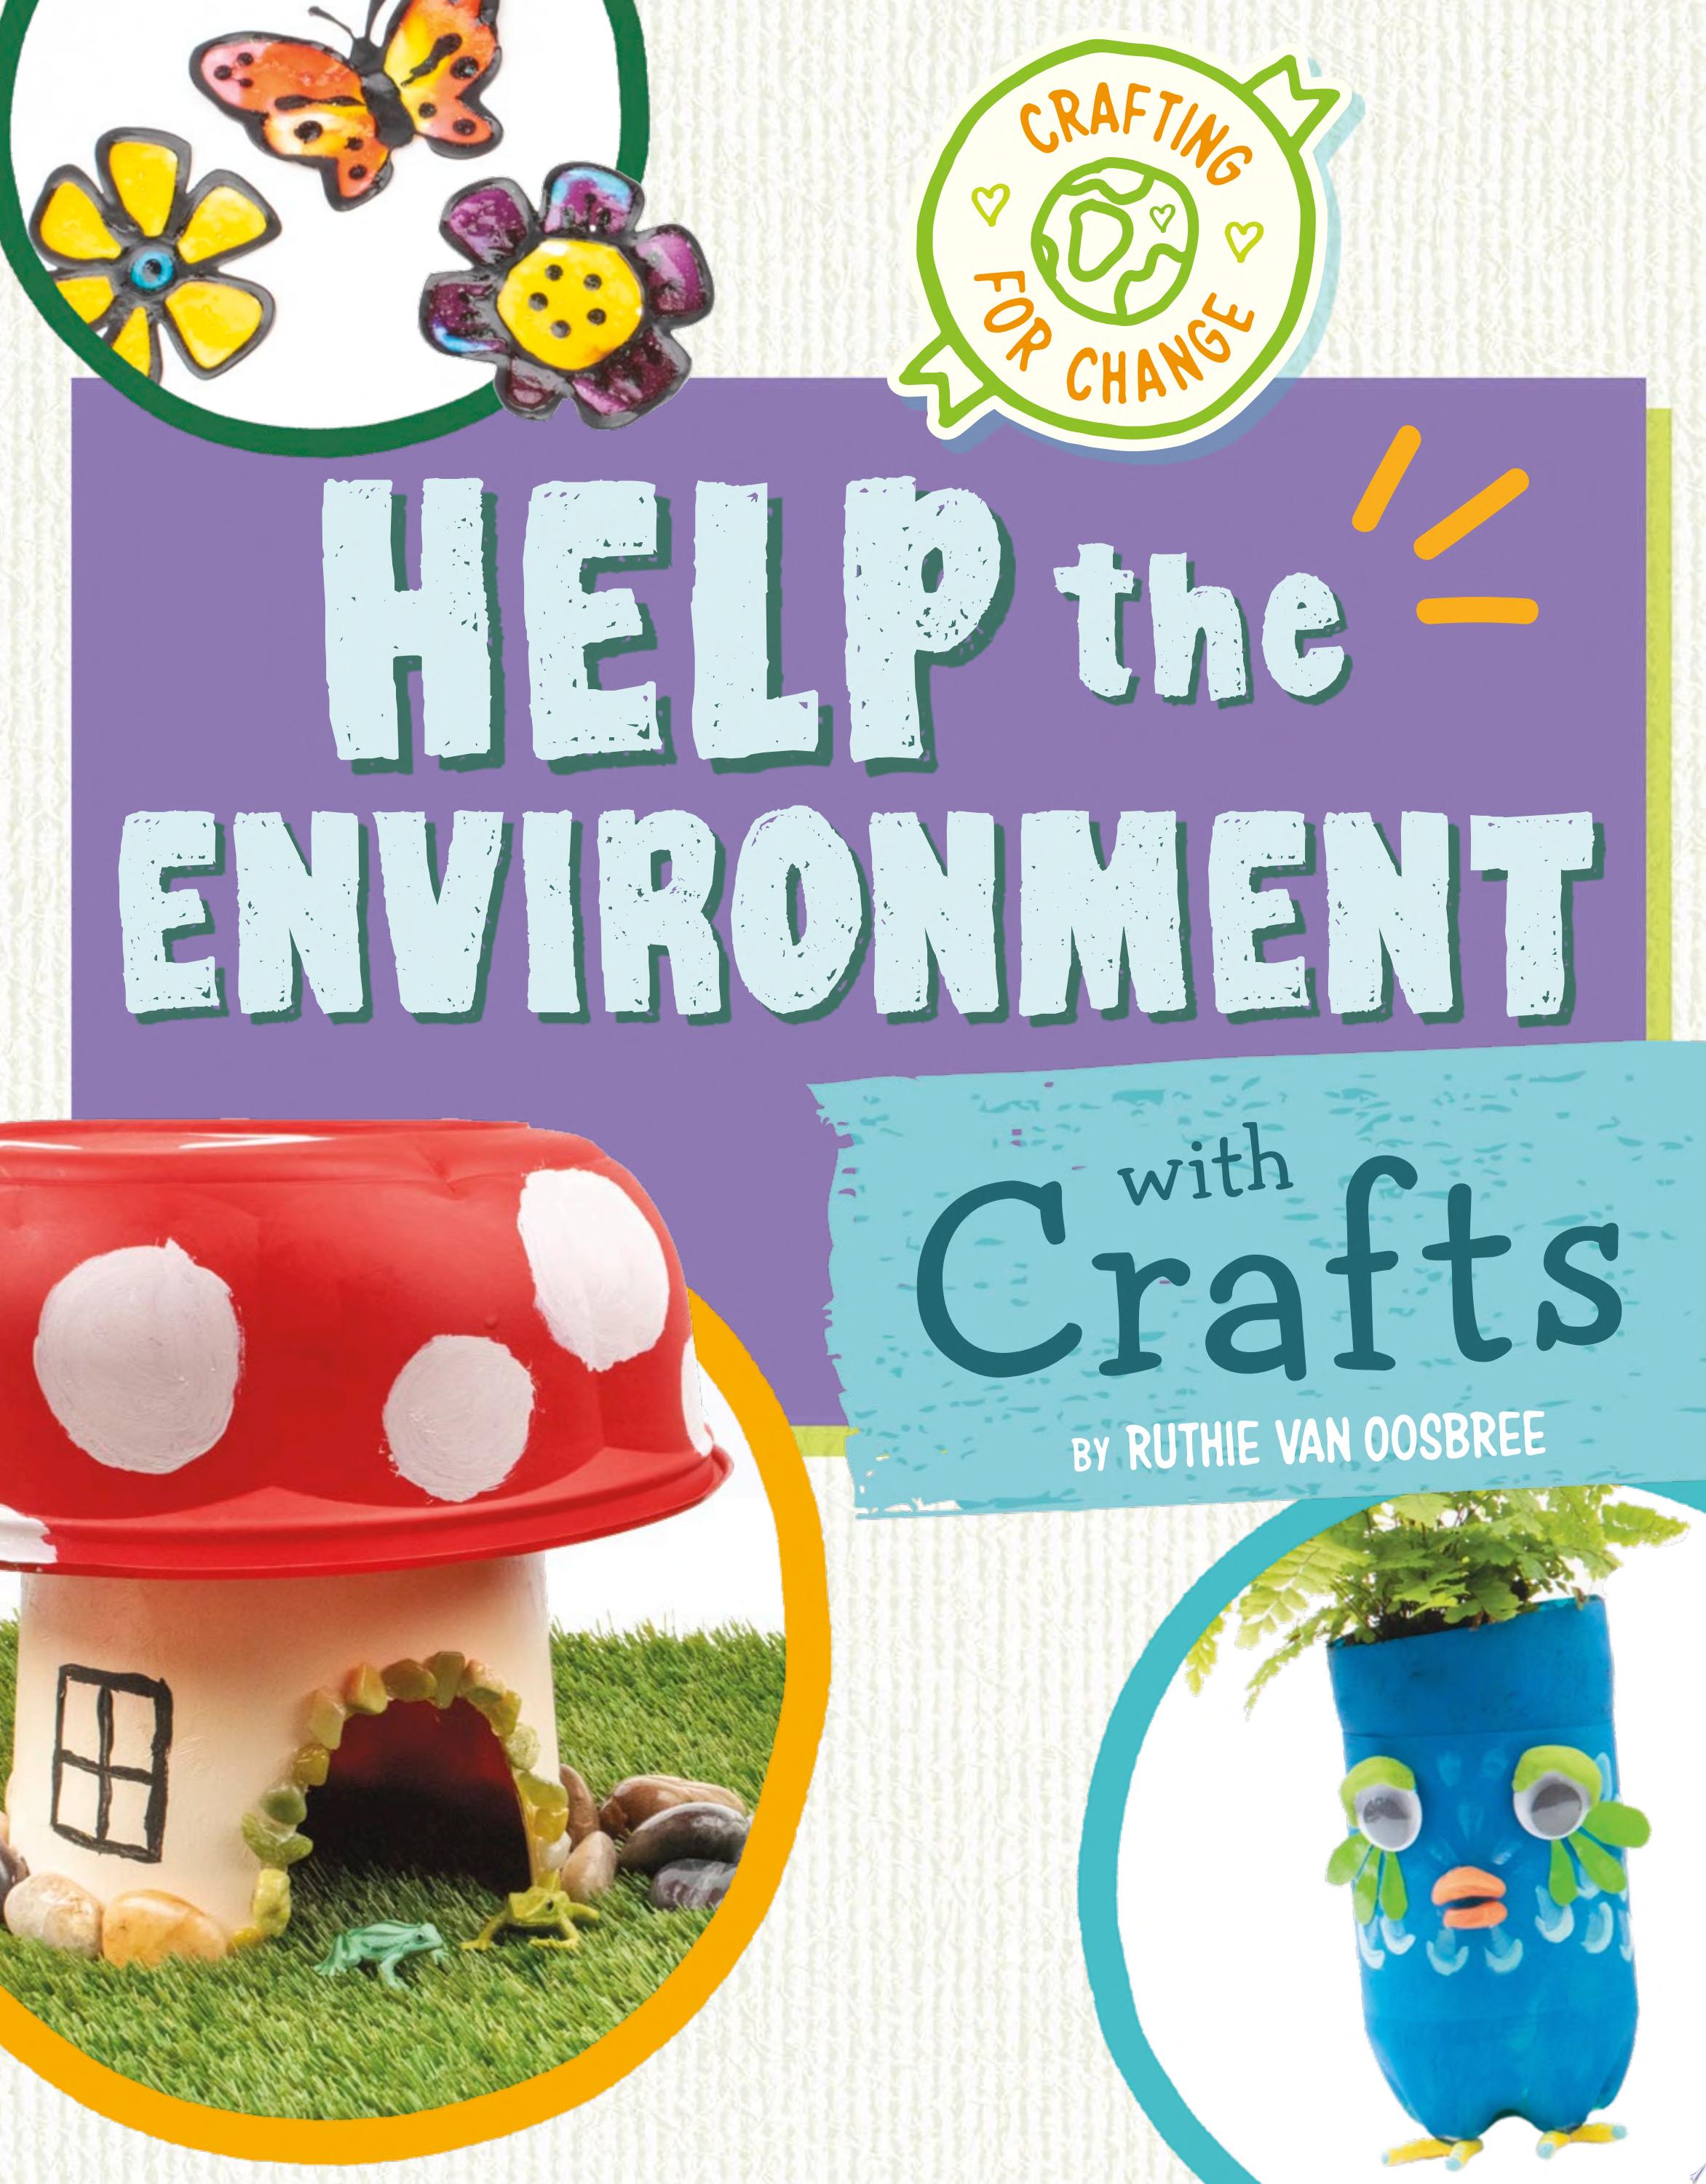 Image for "Help the Environment with Crafts"